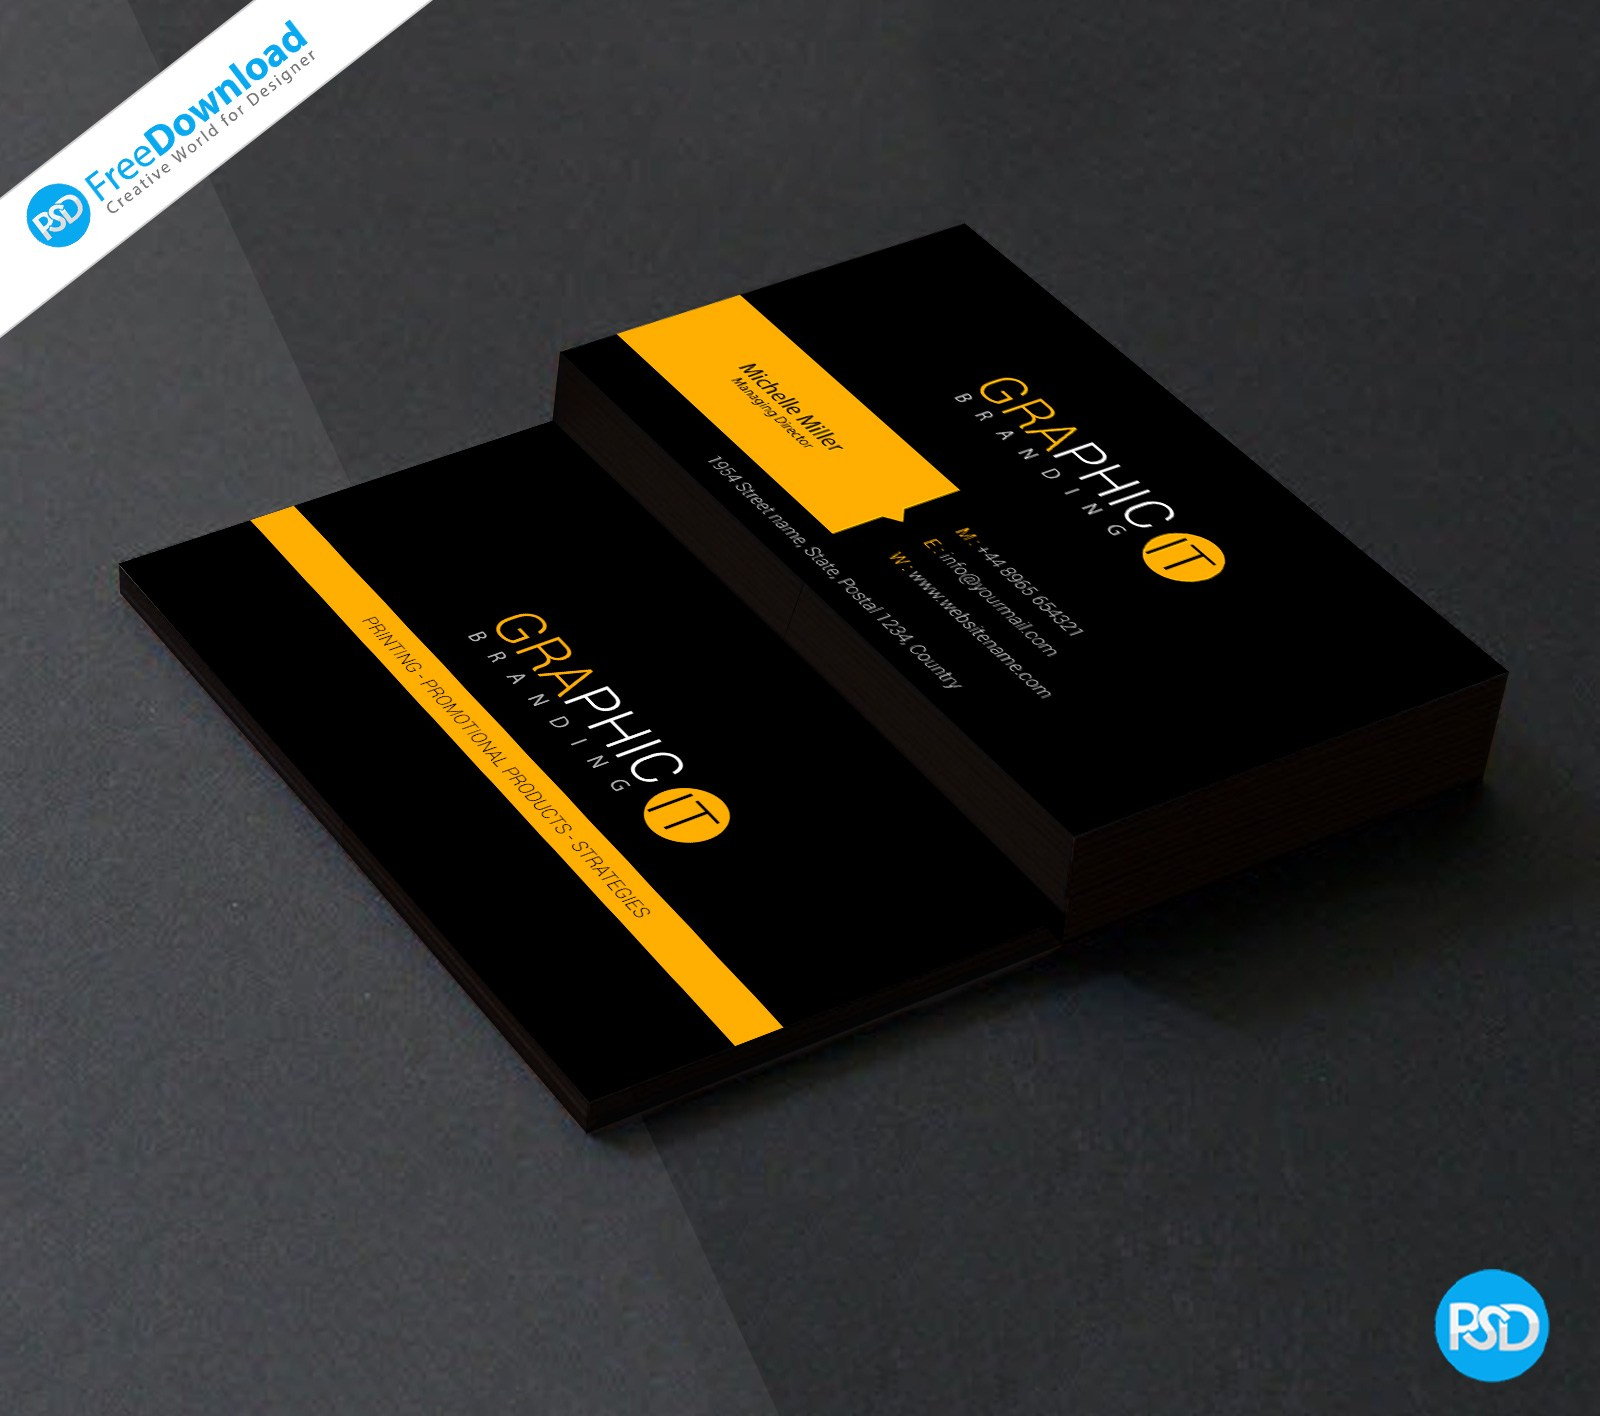 023 Professional Business Card Design Psd Blank Template Intended For Professional Business Card Templates Free Download